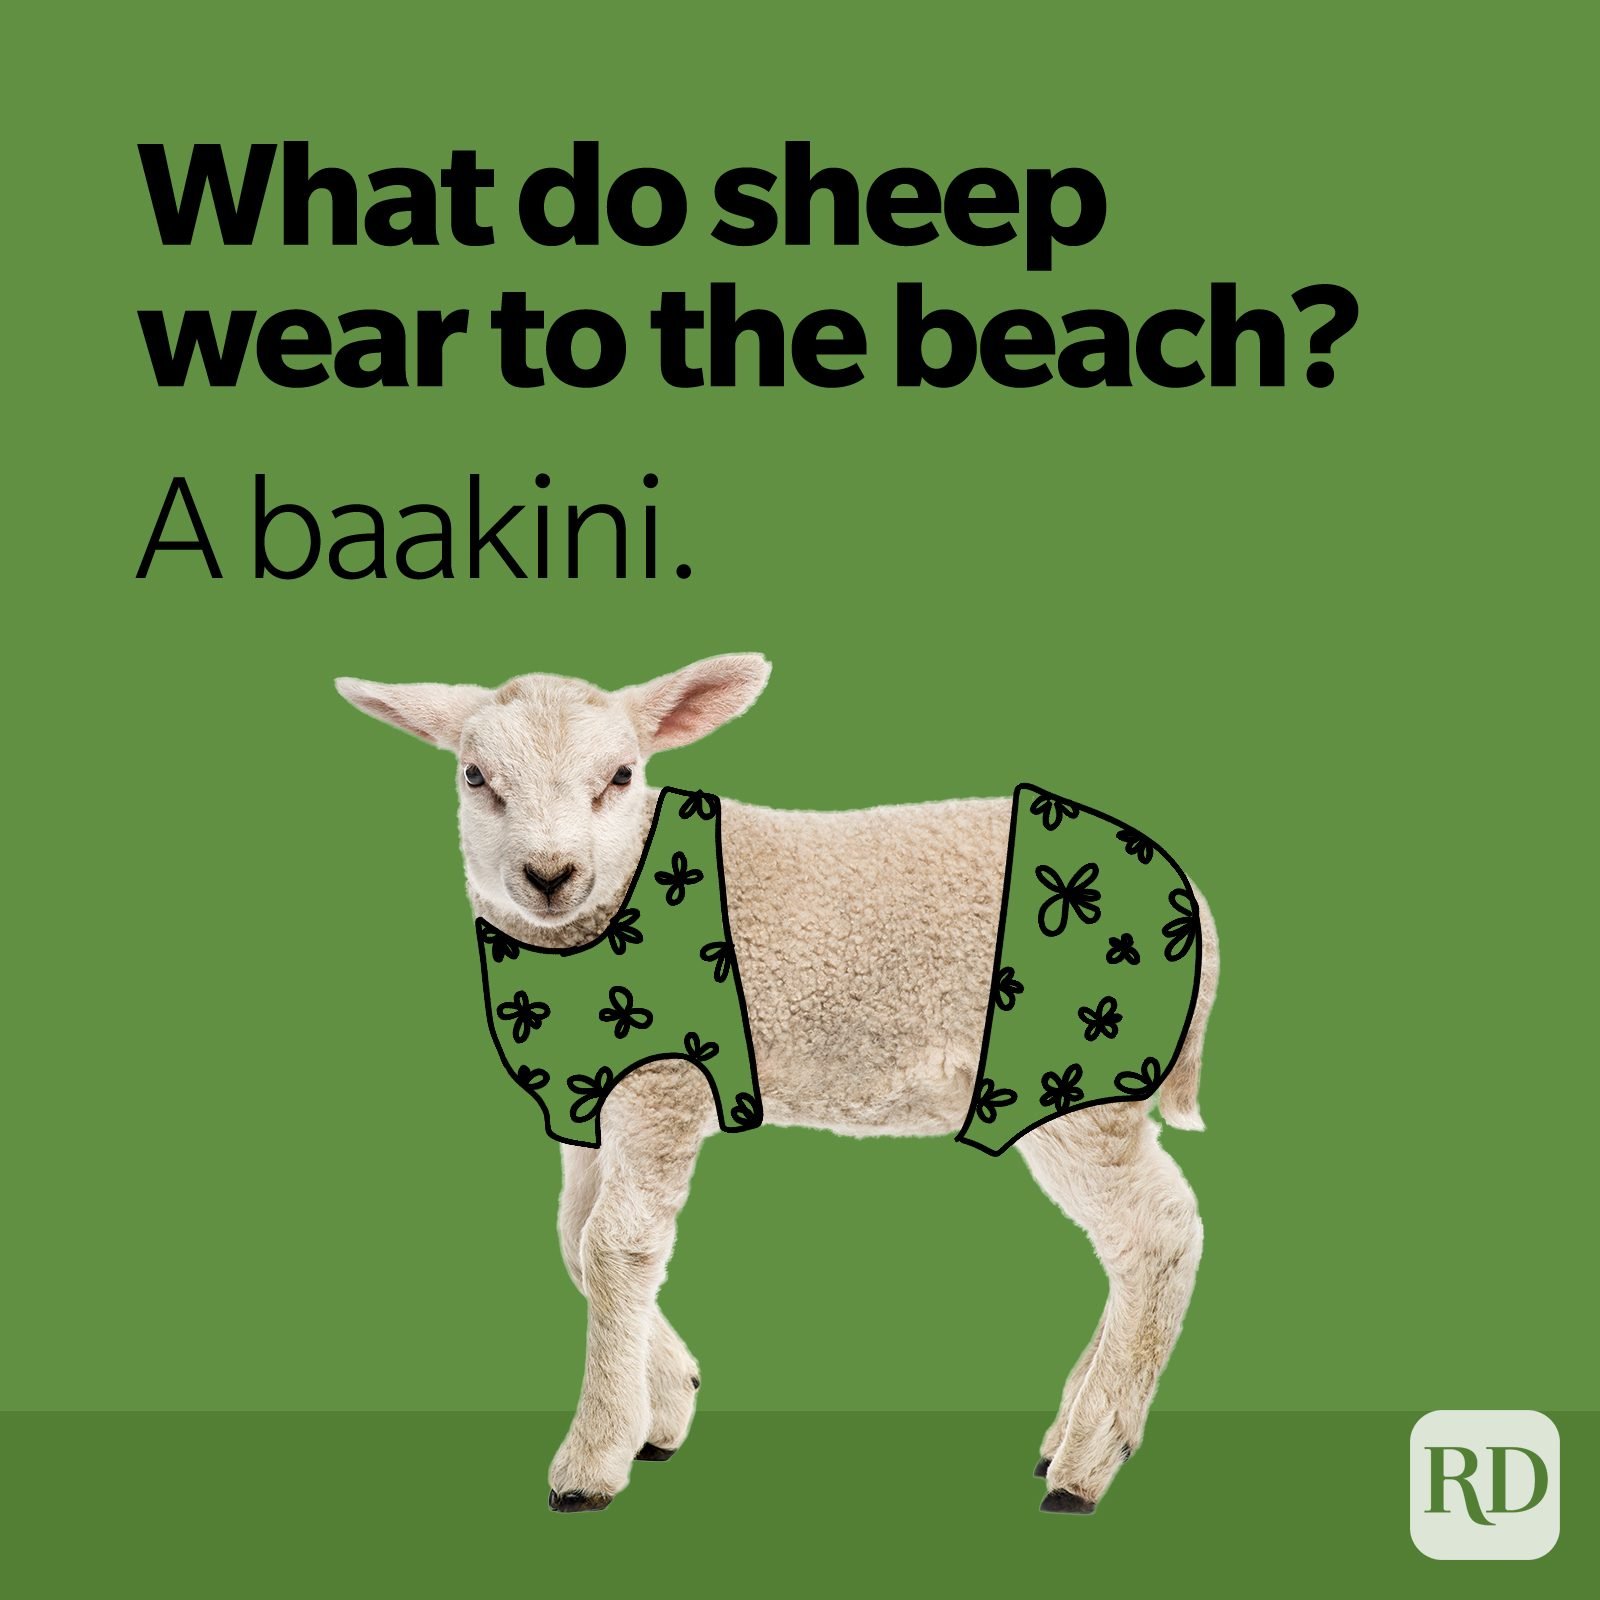 36 Sheep Puns You Haven't Herd Before | Reader's Digest